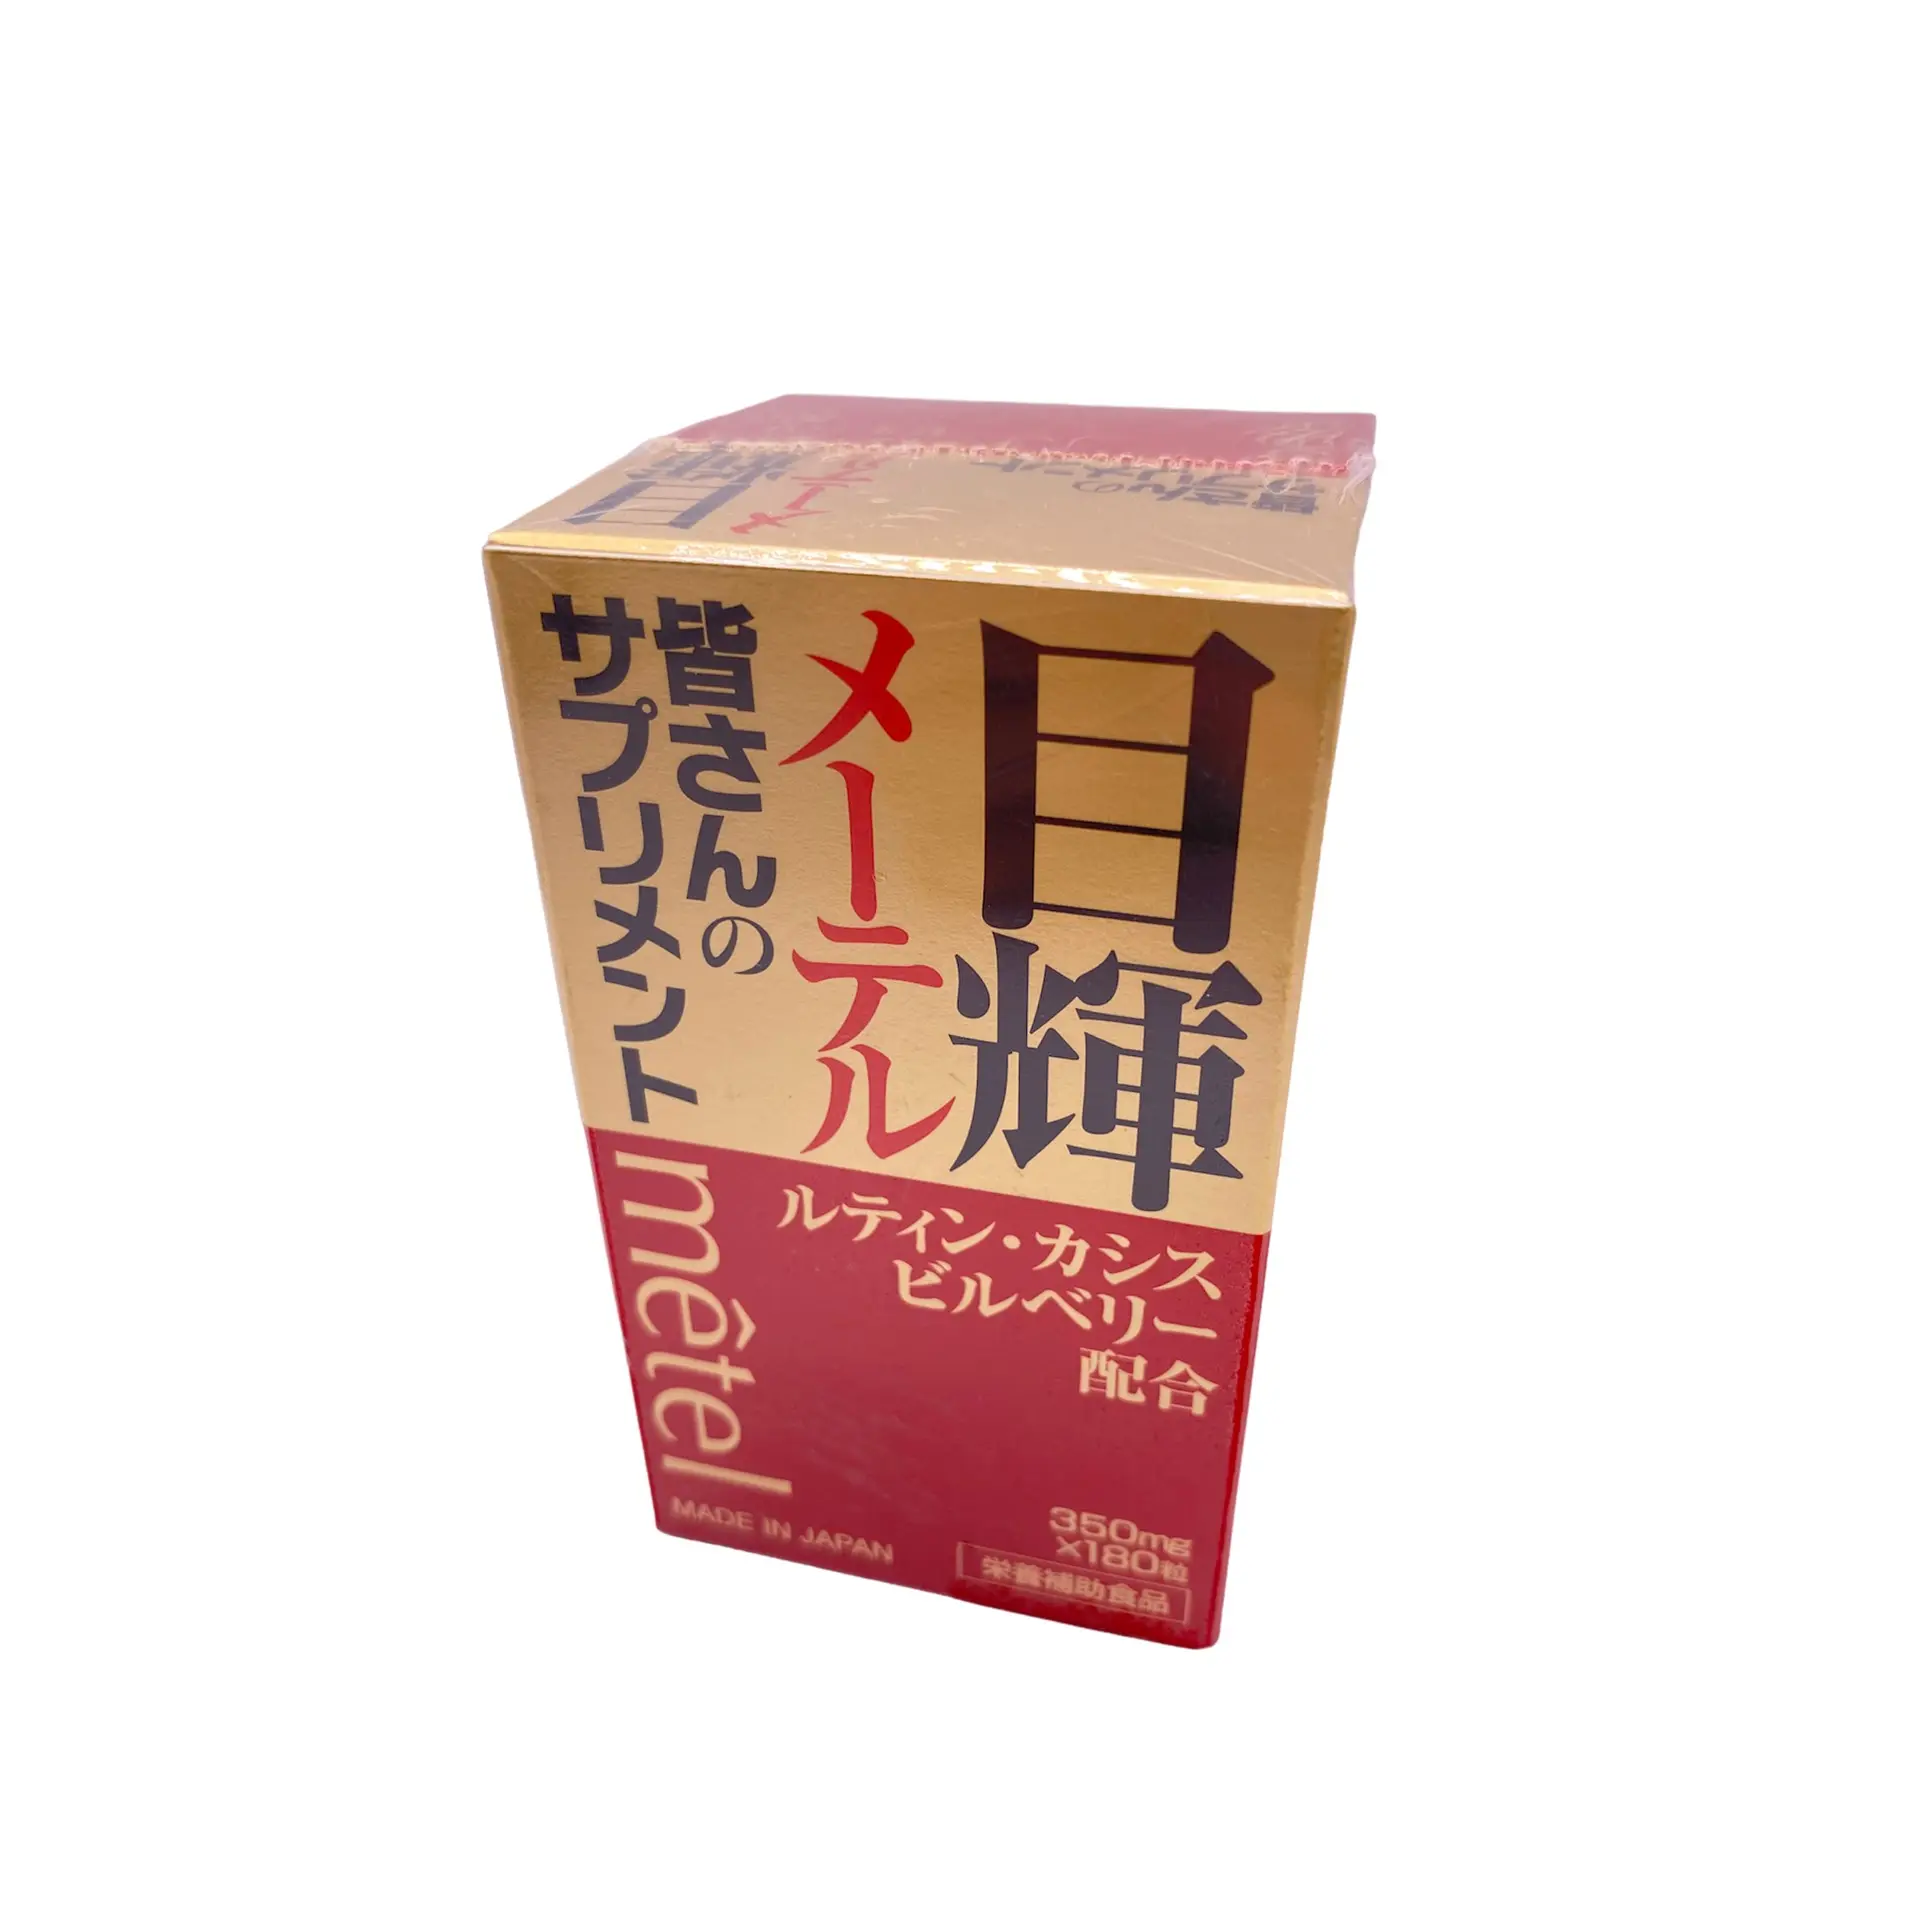 Health care supplement High fidelity and High quality at reasonable prices eye care product made in japan